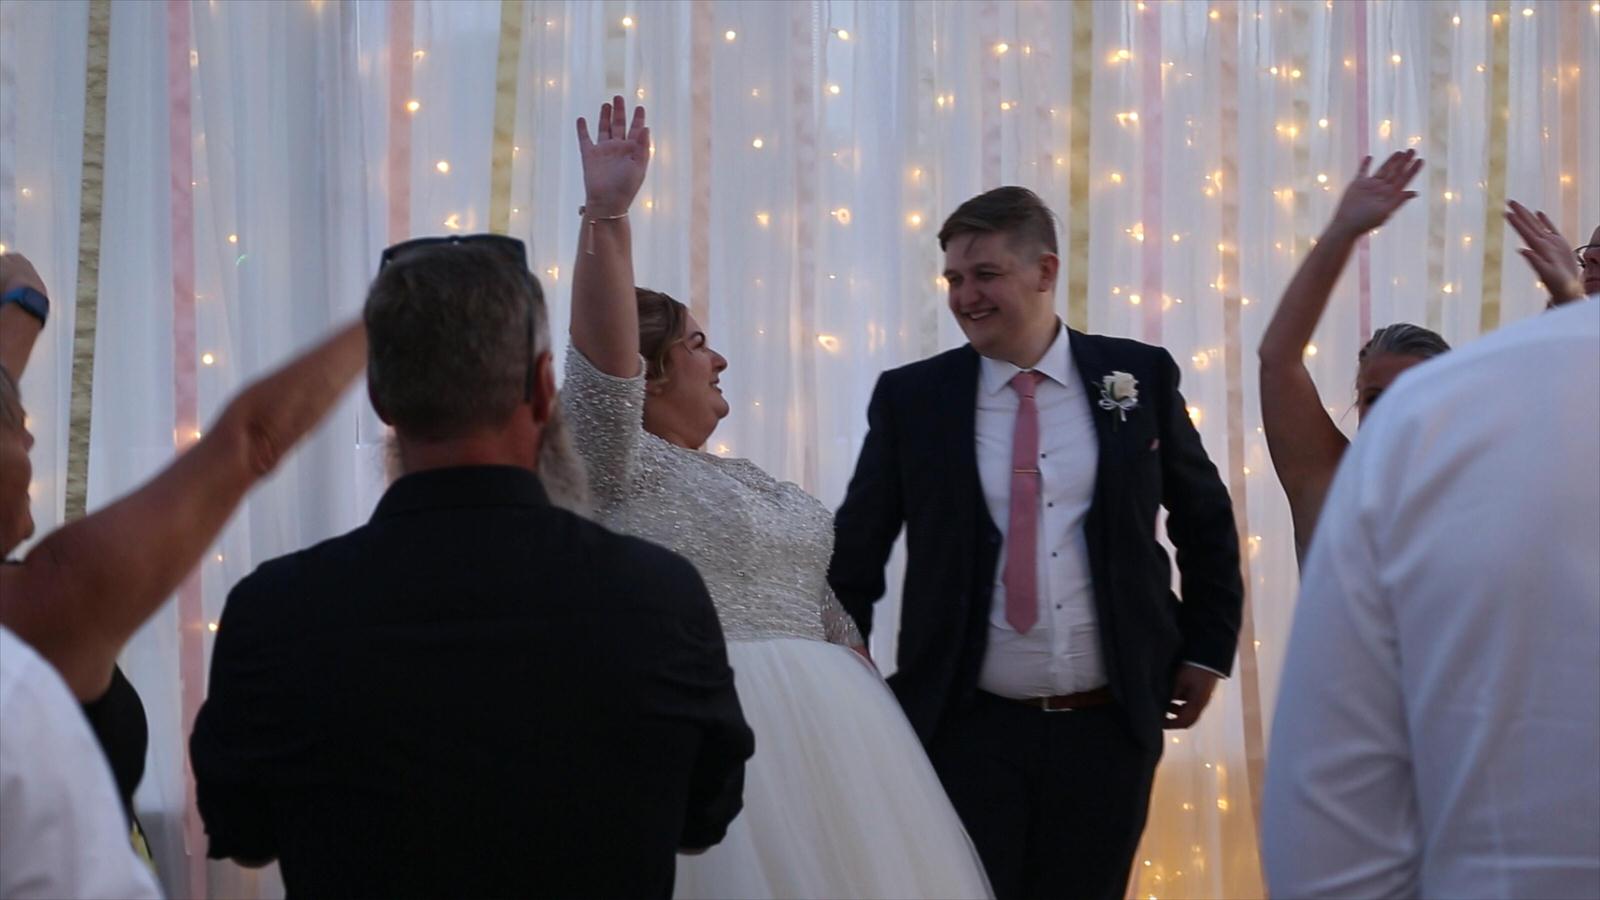 vide still of everyone cheering for couple after first dance